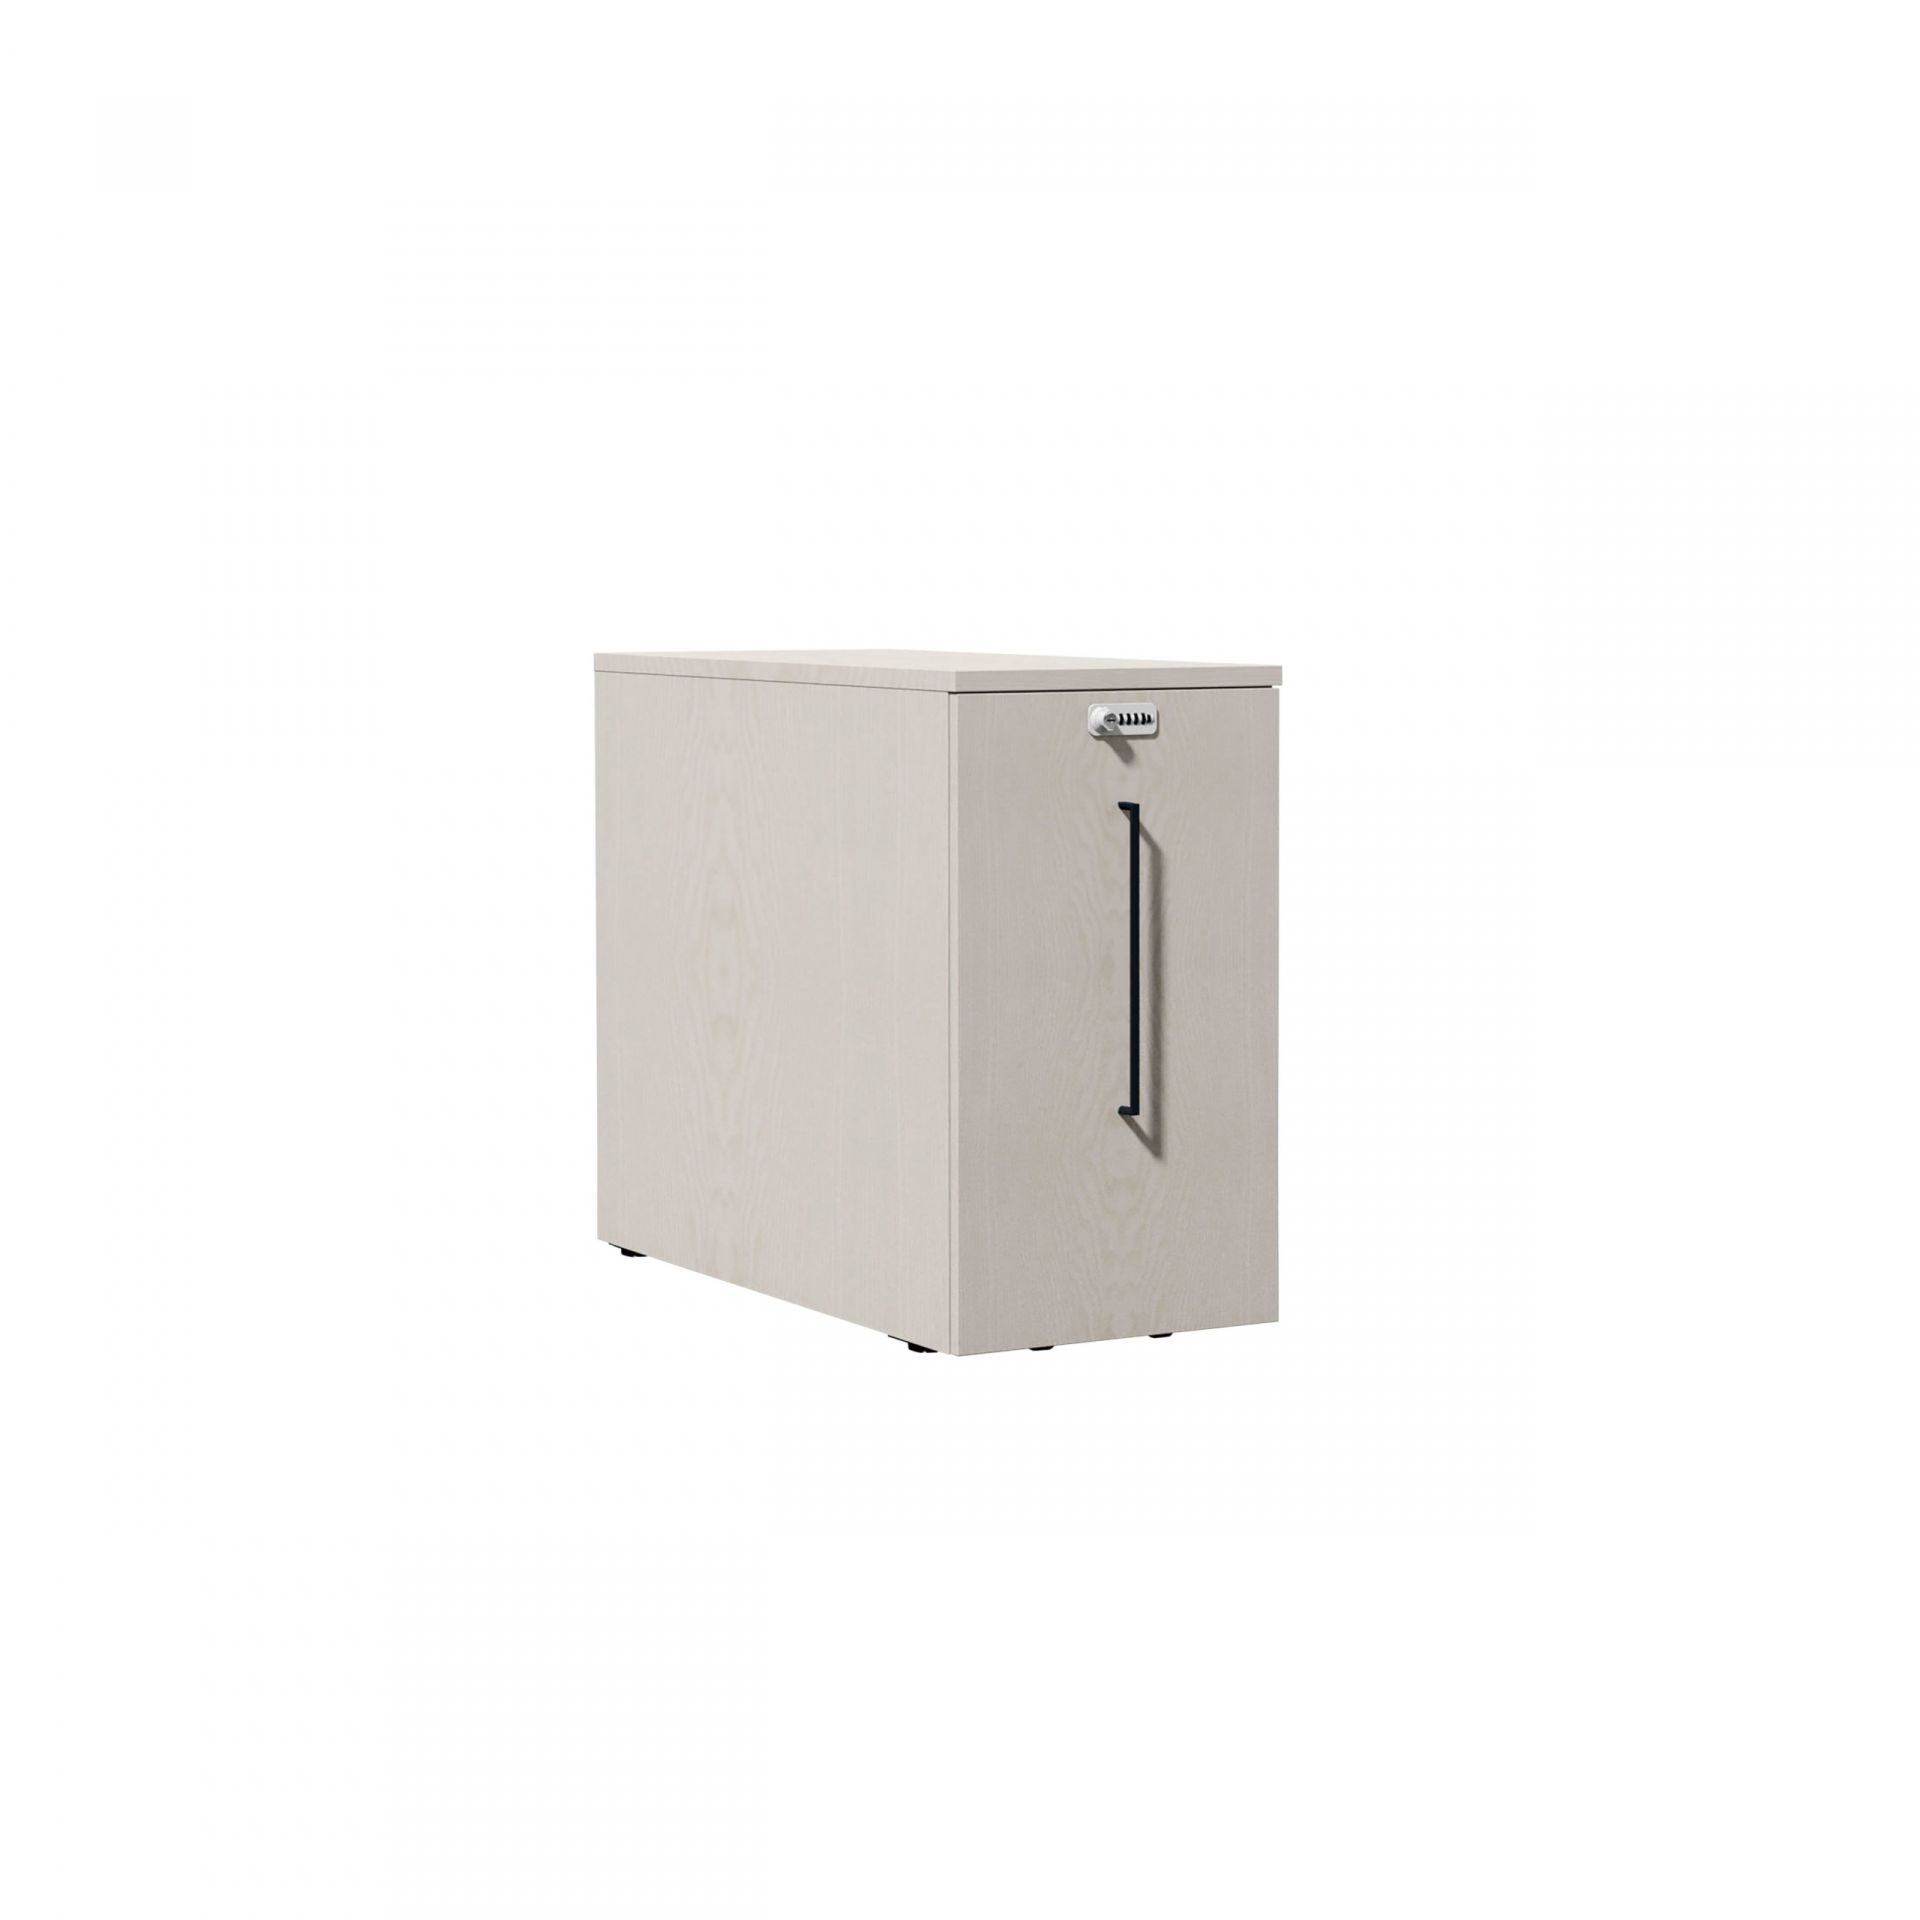 Hold Tower cabinet product image 5